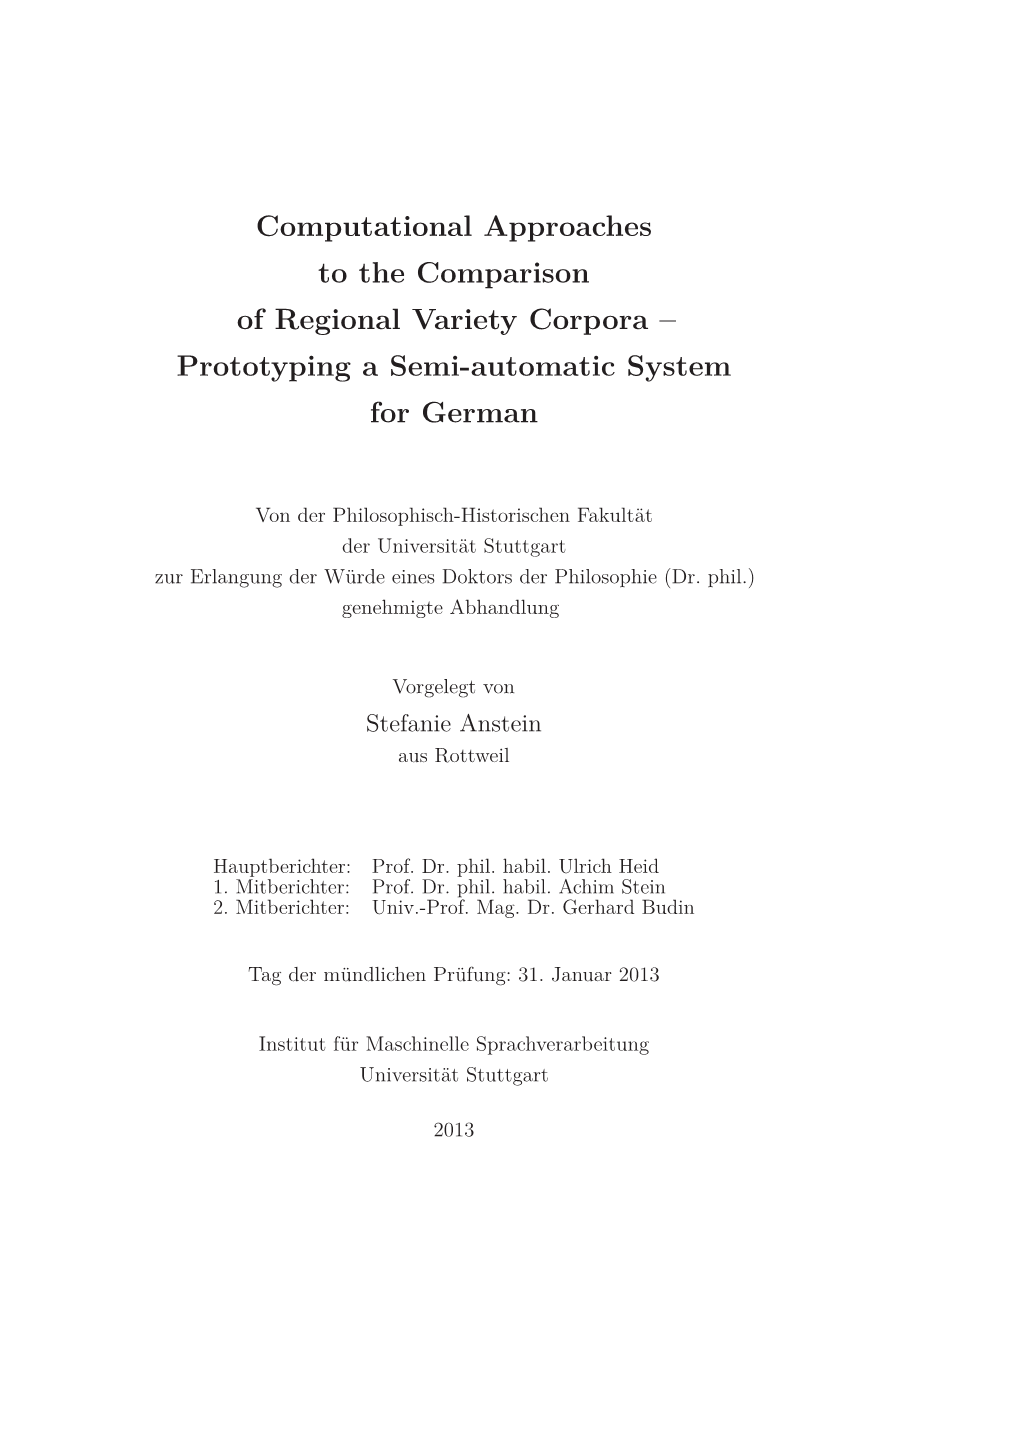 Computational Approaches to the Comparison of Regional Variety Corpora – Prototyping a Semi-Automatic System for German